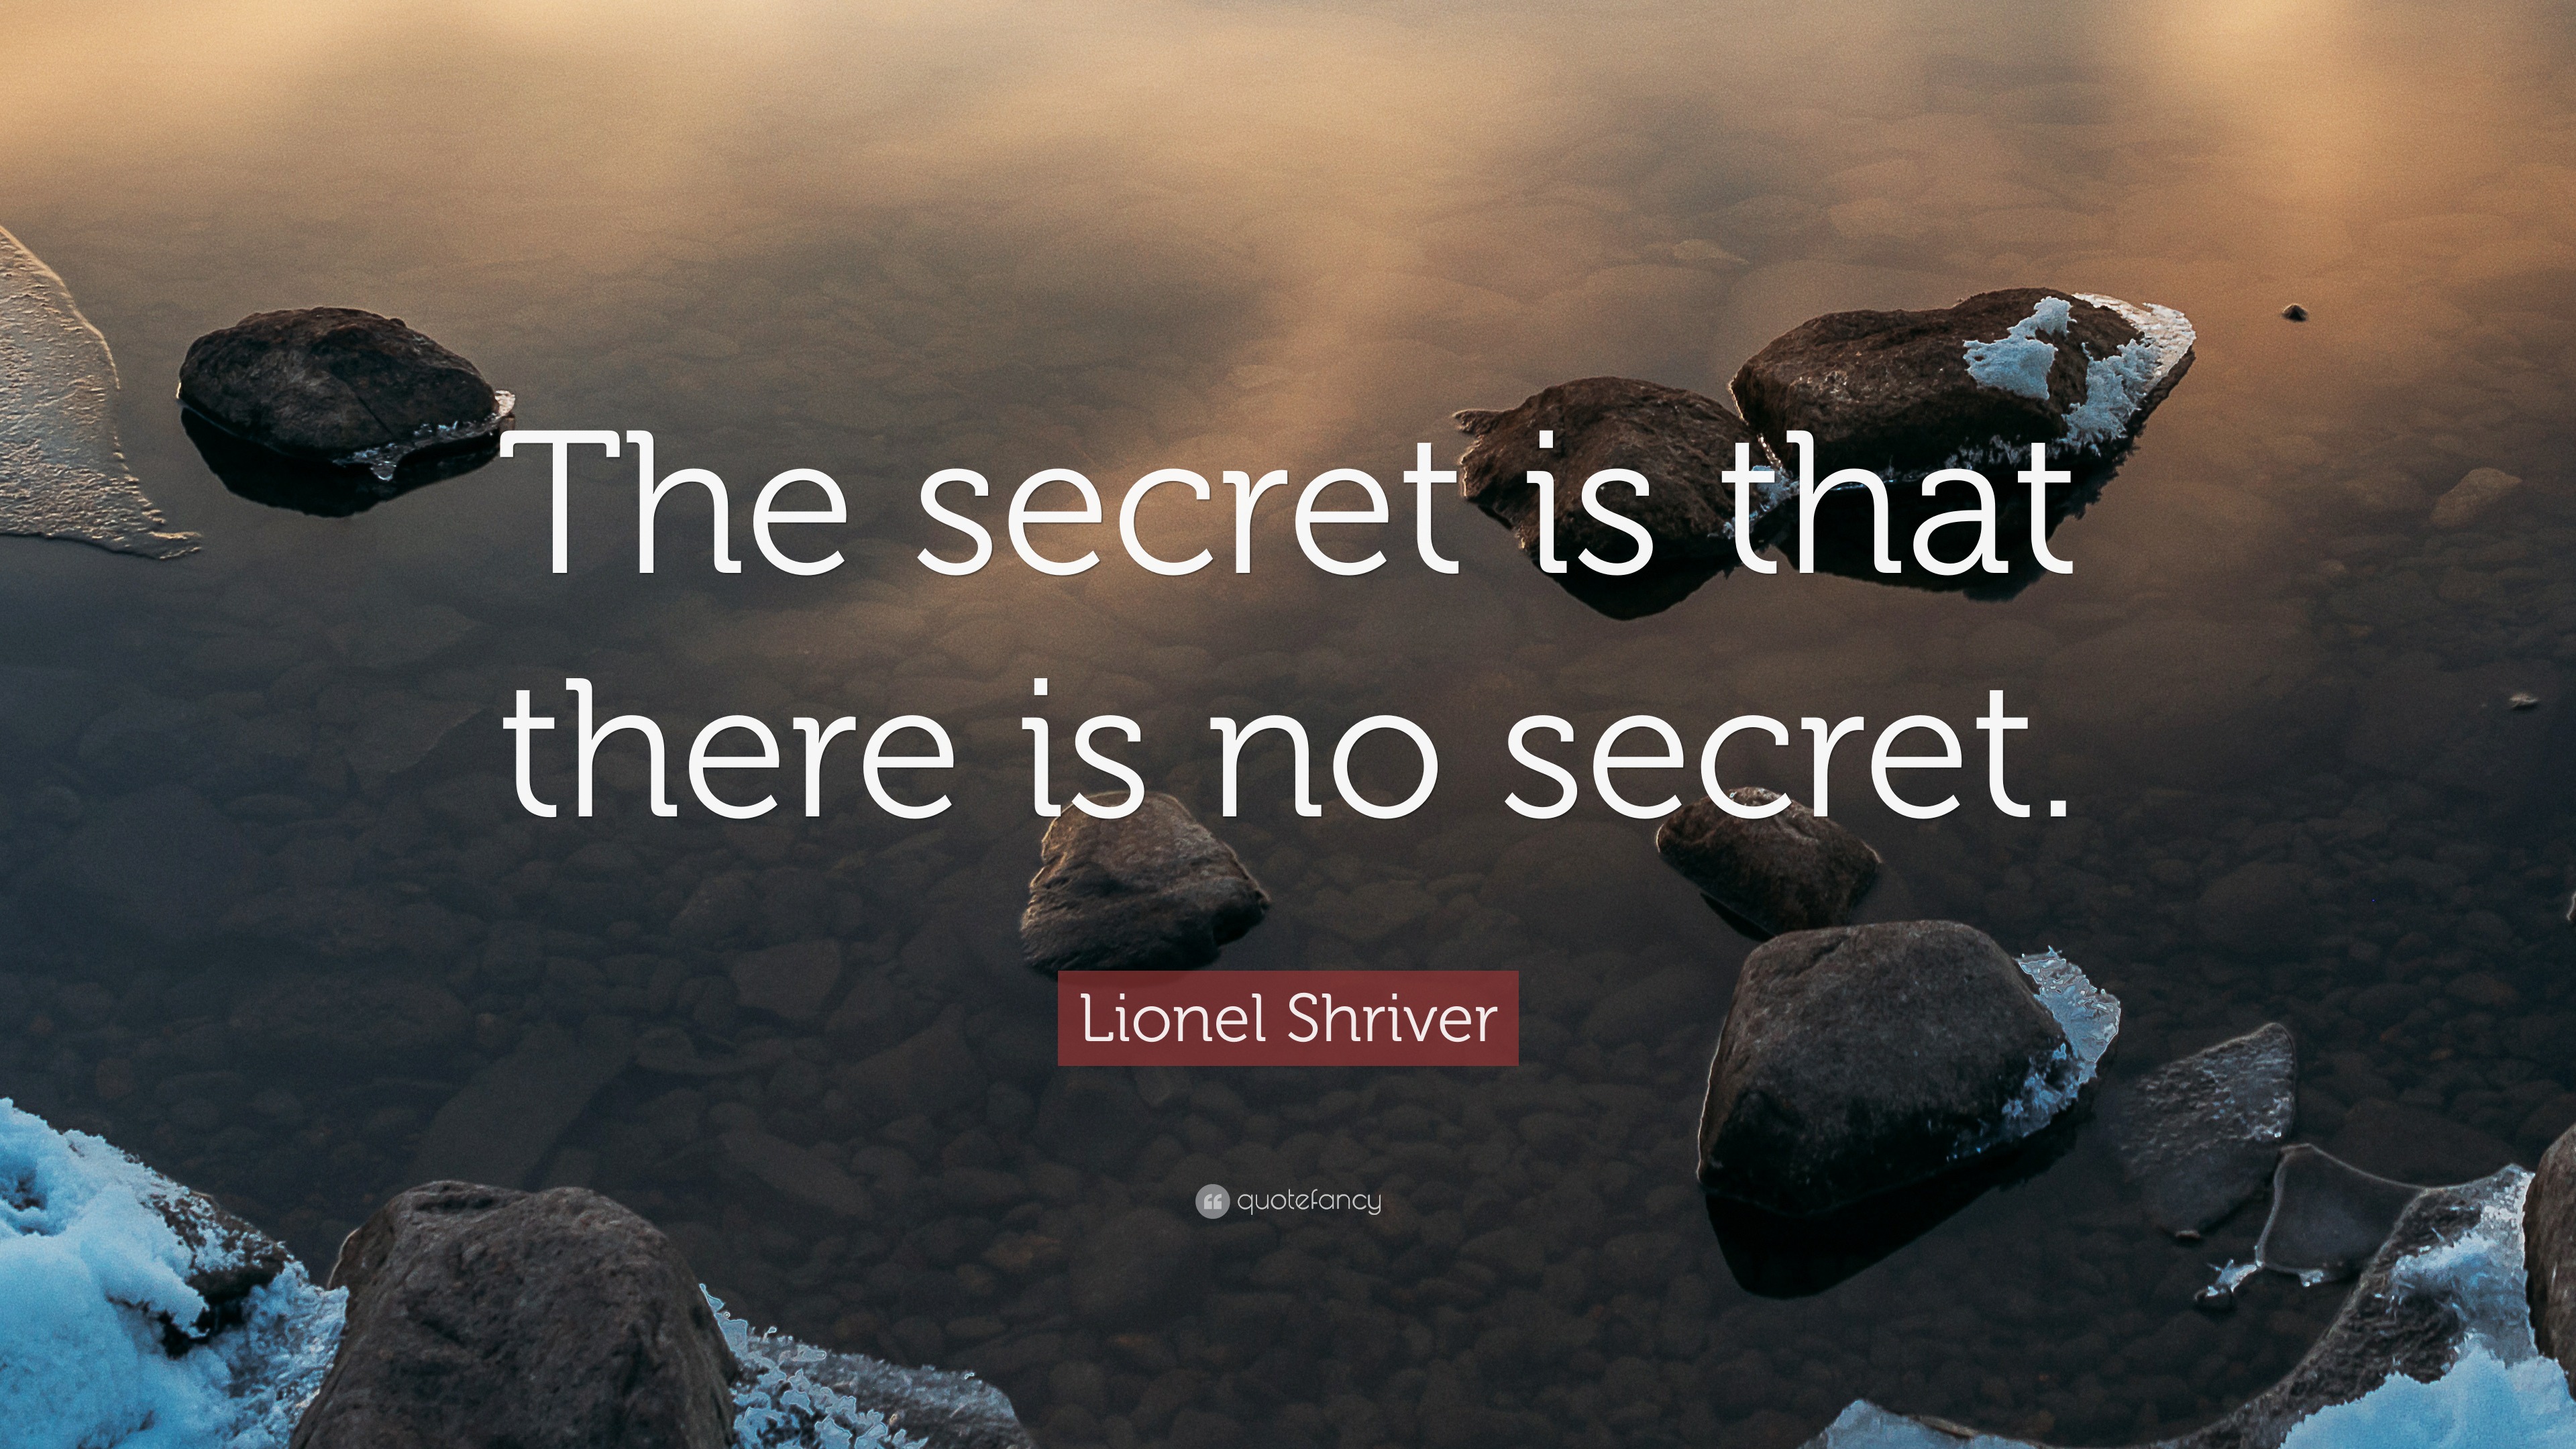 Lionel Shriver Quote “the Secret Is That There Is No Secret ”